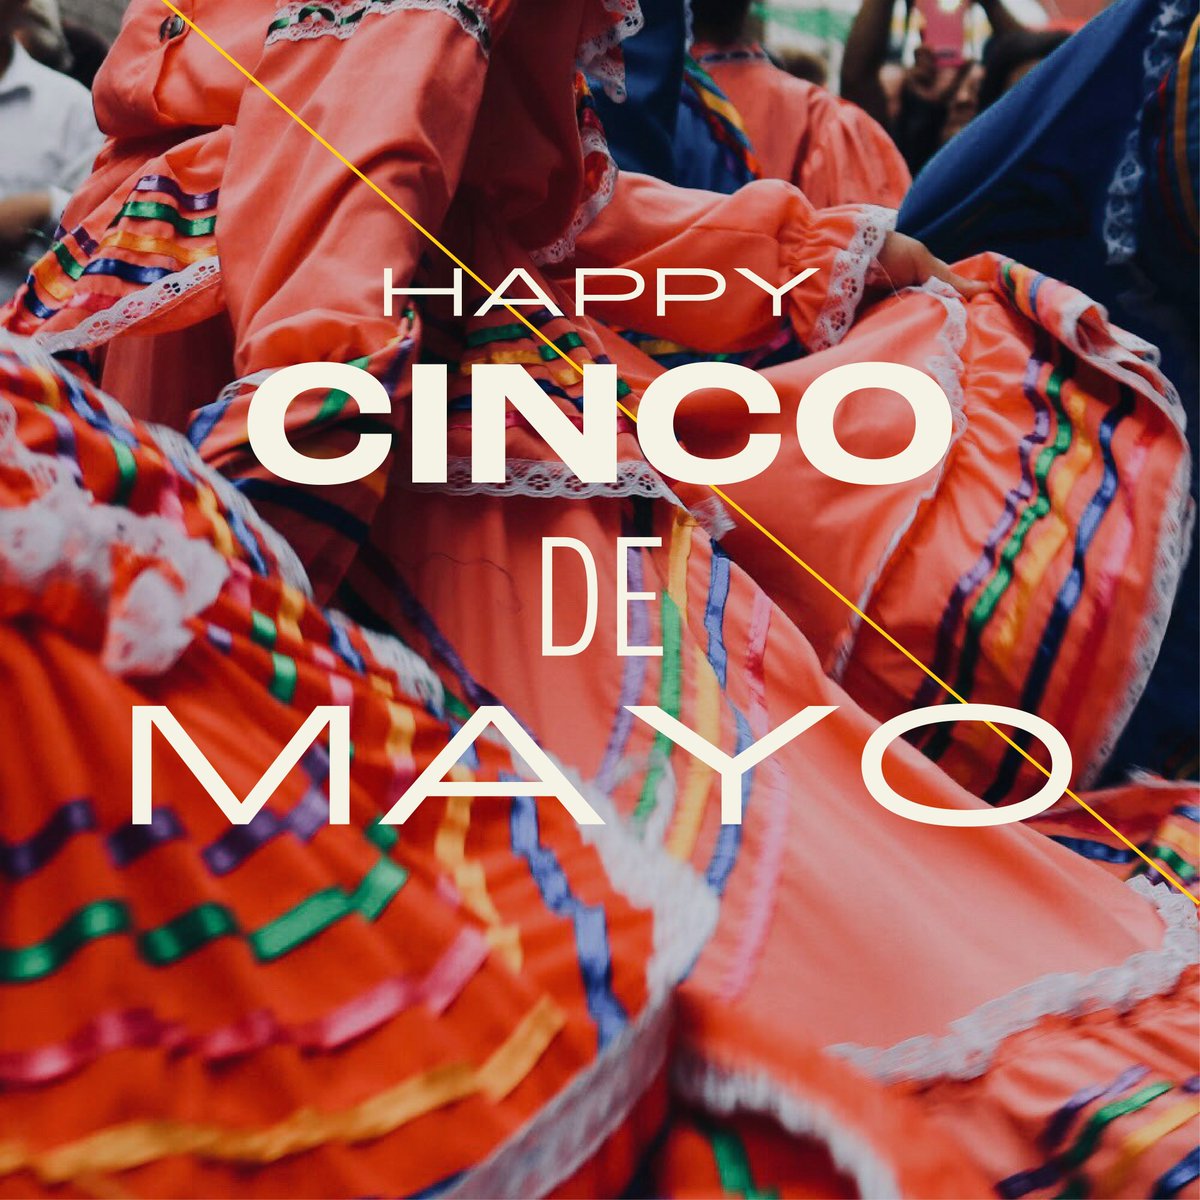 Today let’s remember the impact on our Mexican American friends and neighbors have on our community. Diversity truly makes us stronger. ¡Feliz Cinco de Mayo!